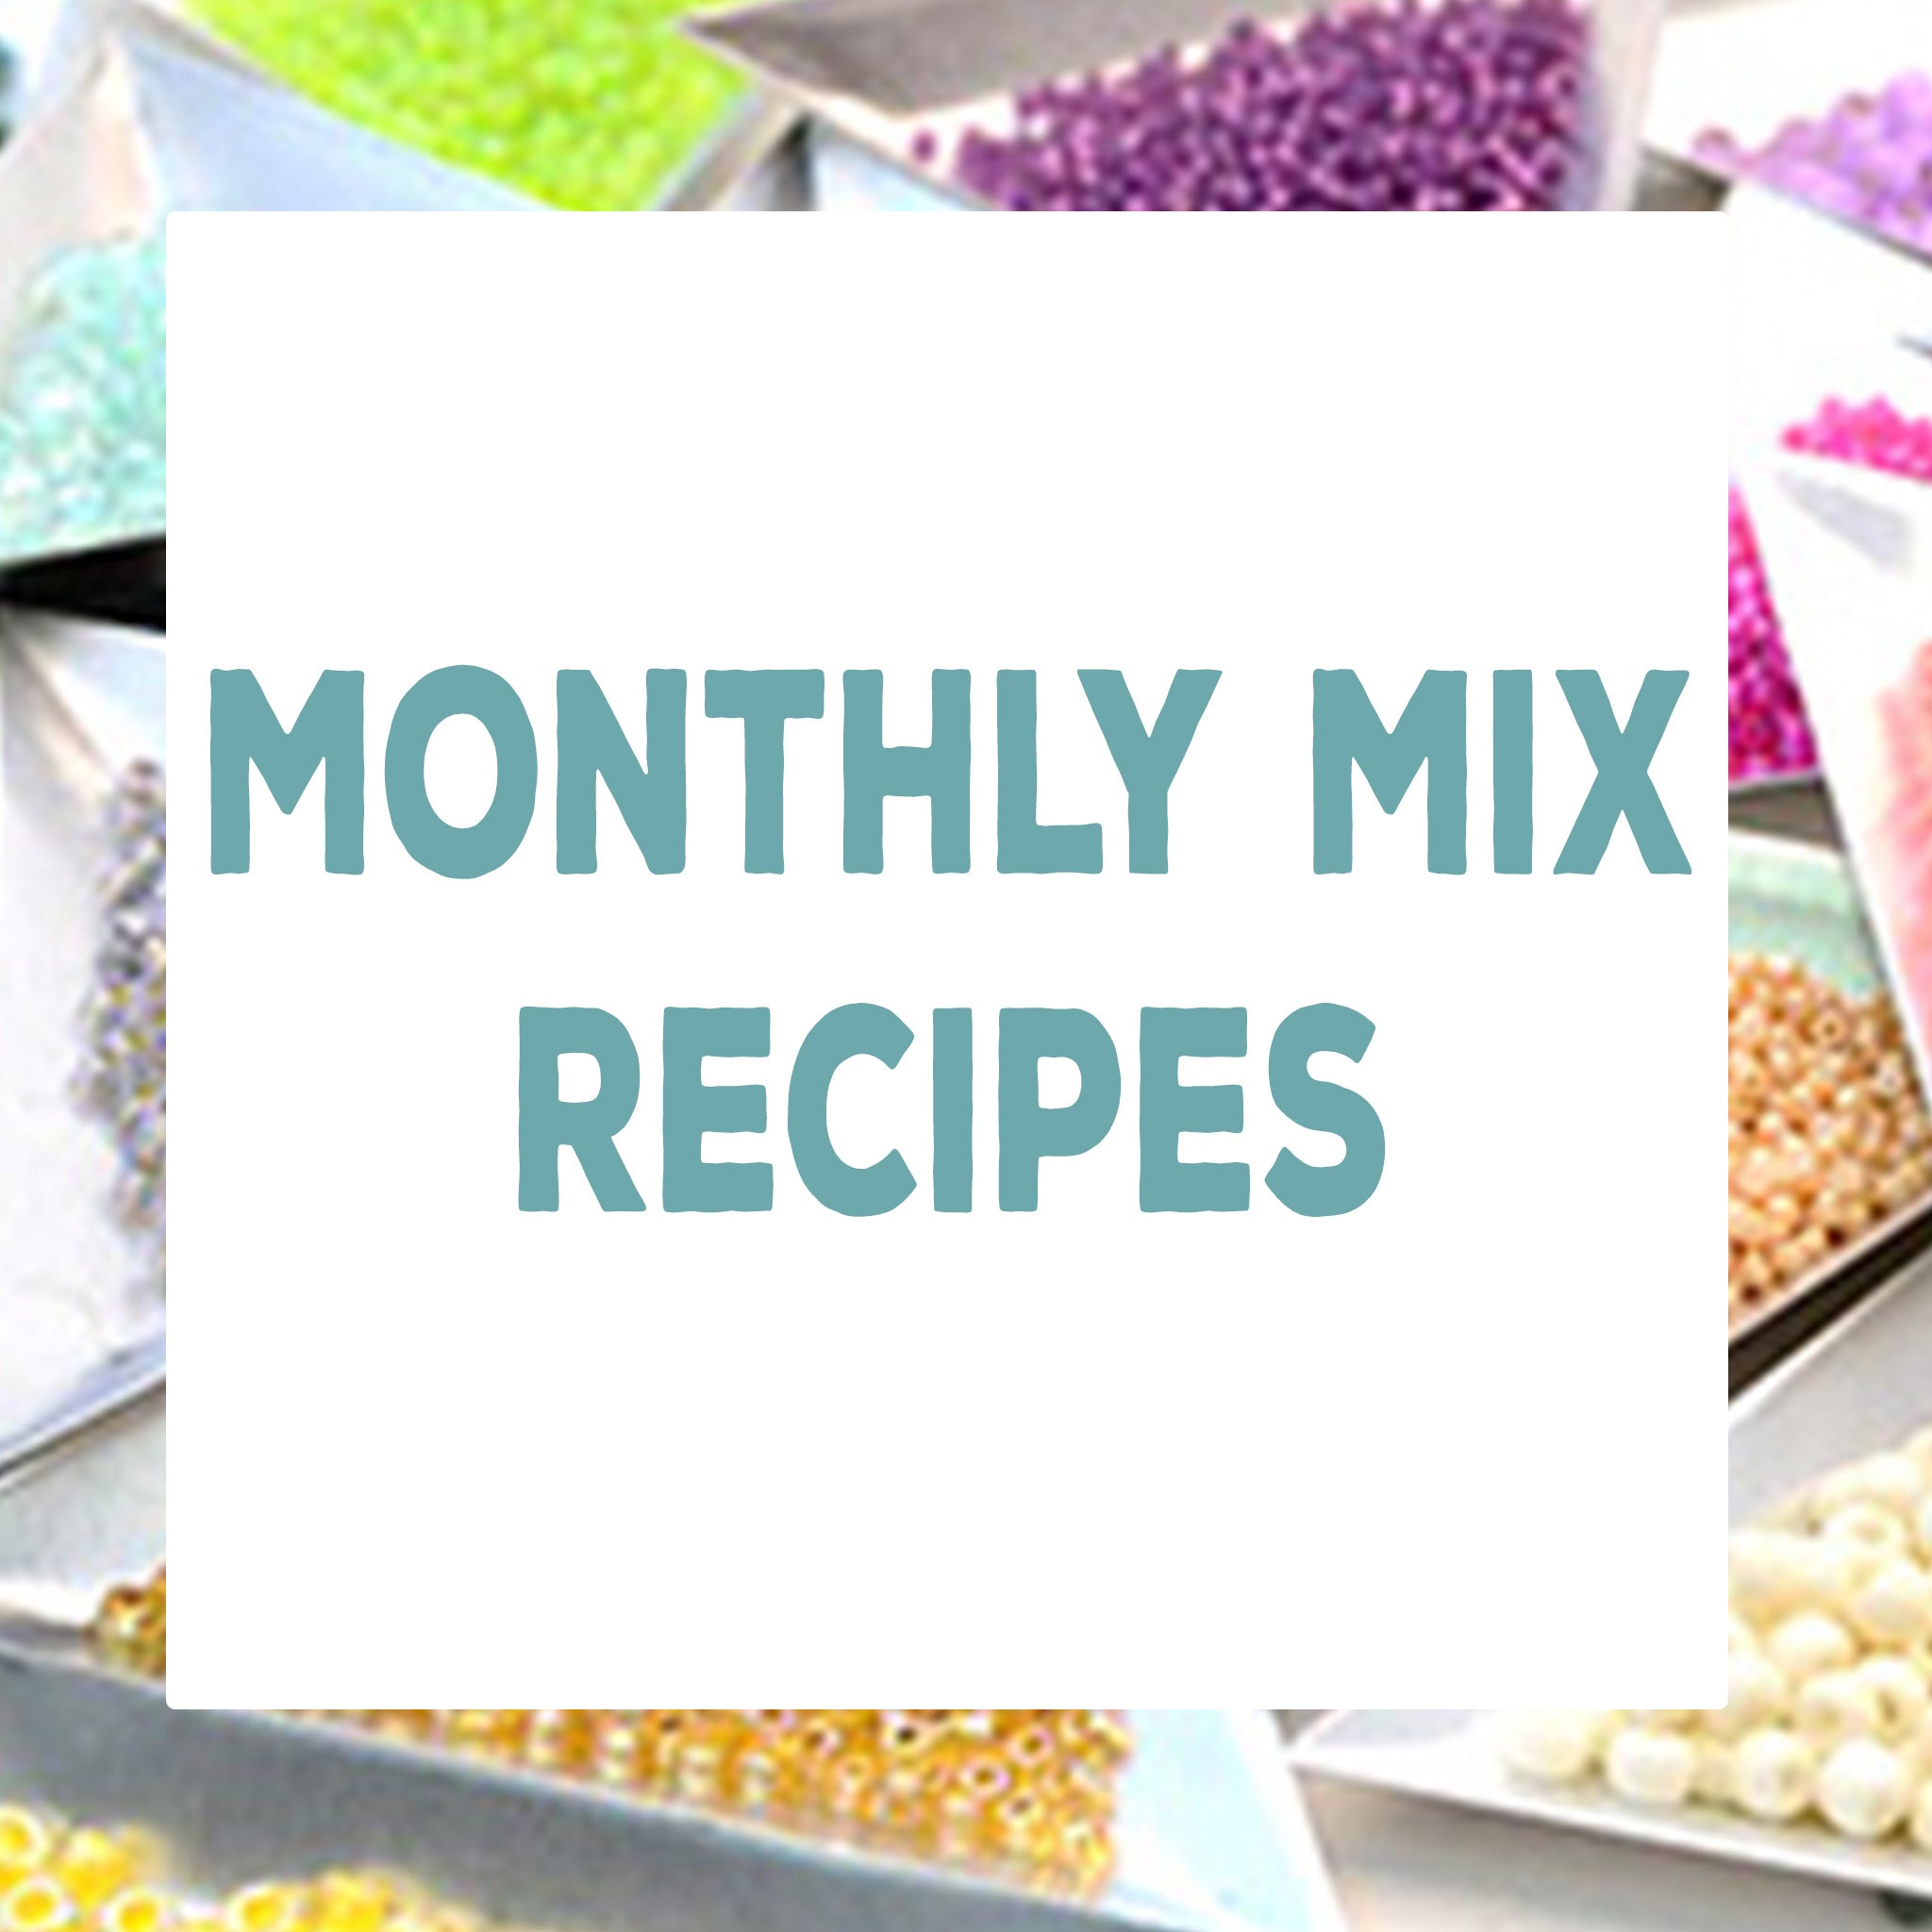 Monthly Mix Recipes